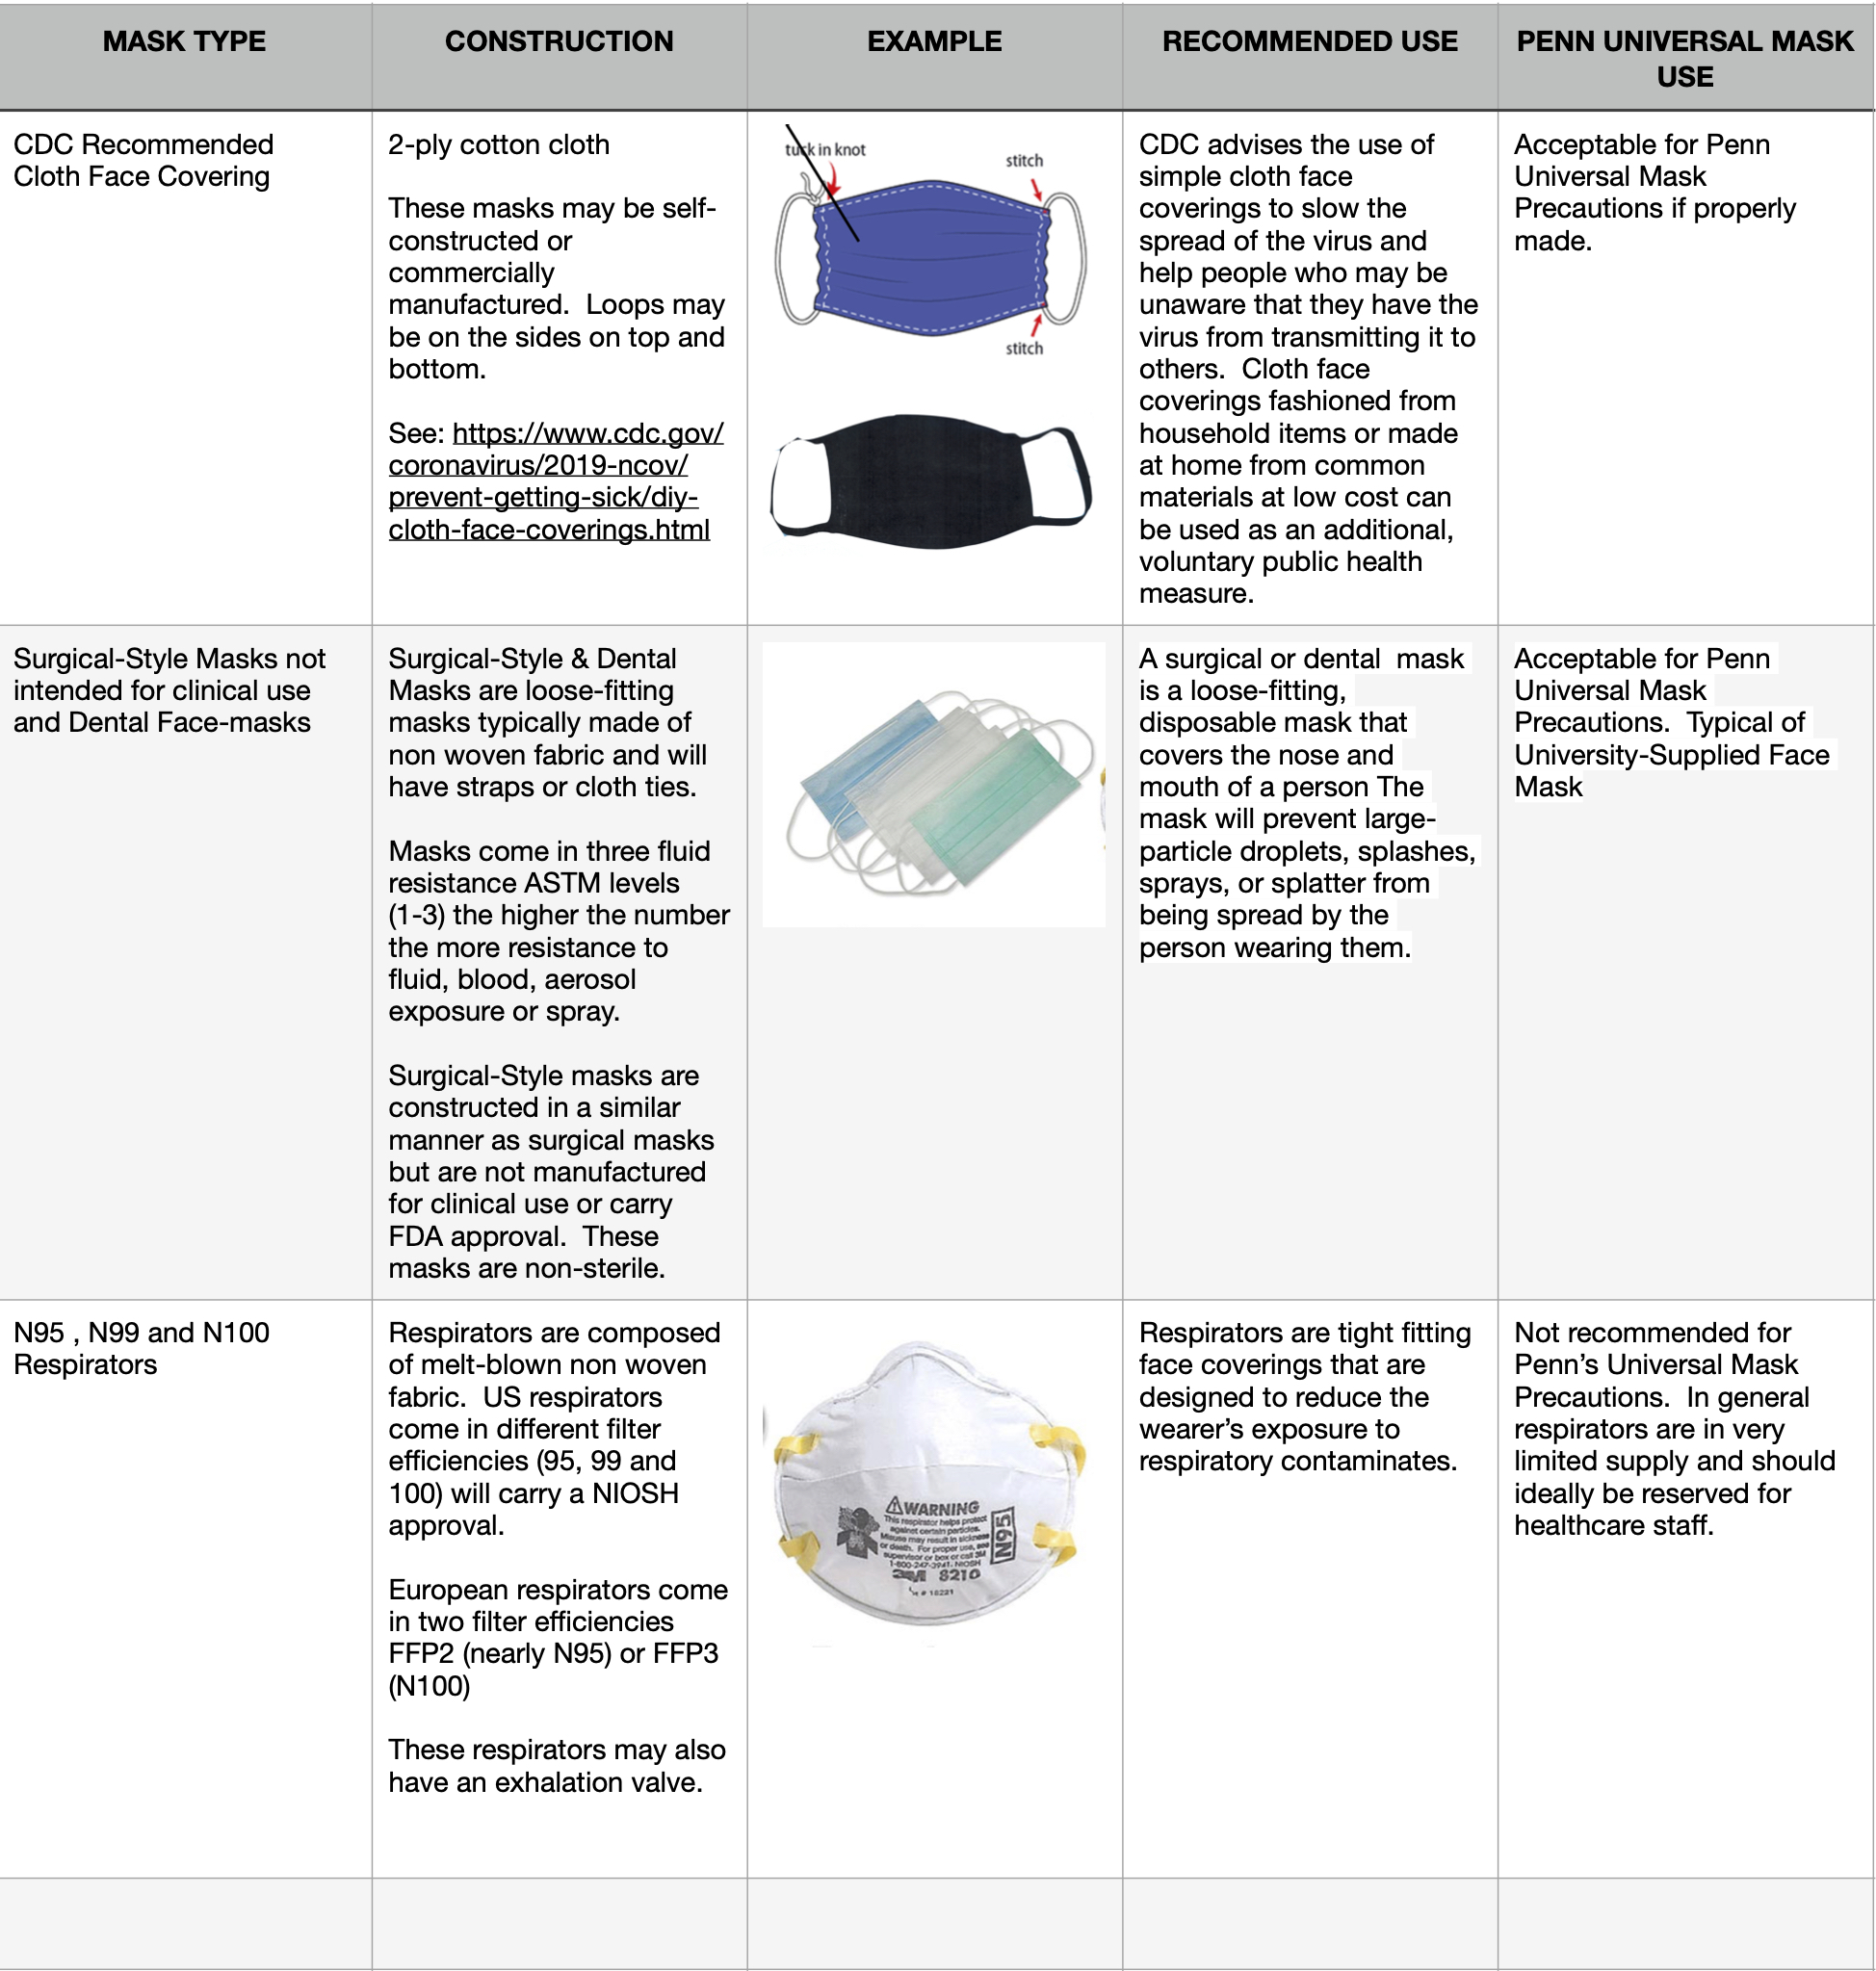 Cloth Face Coverings, Masks and Respirators Compared | PennEHRS